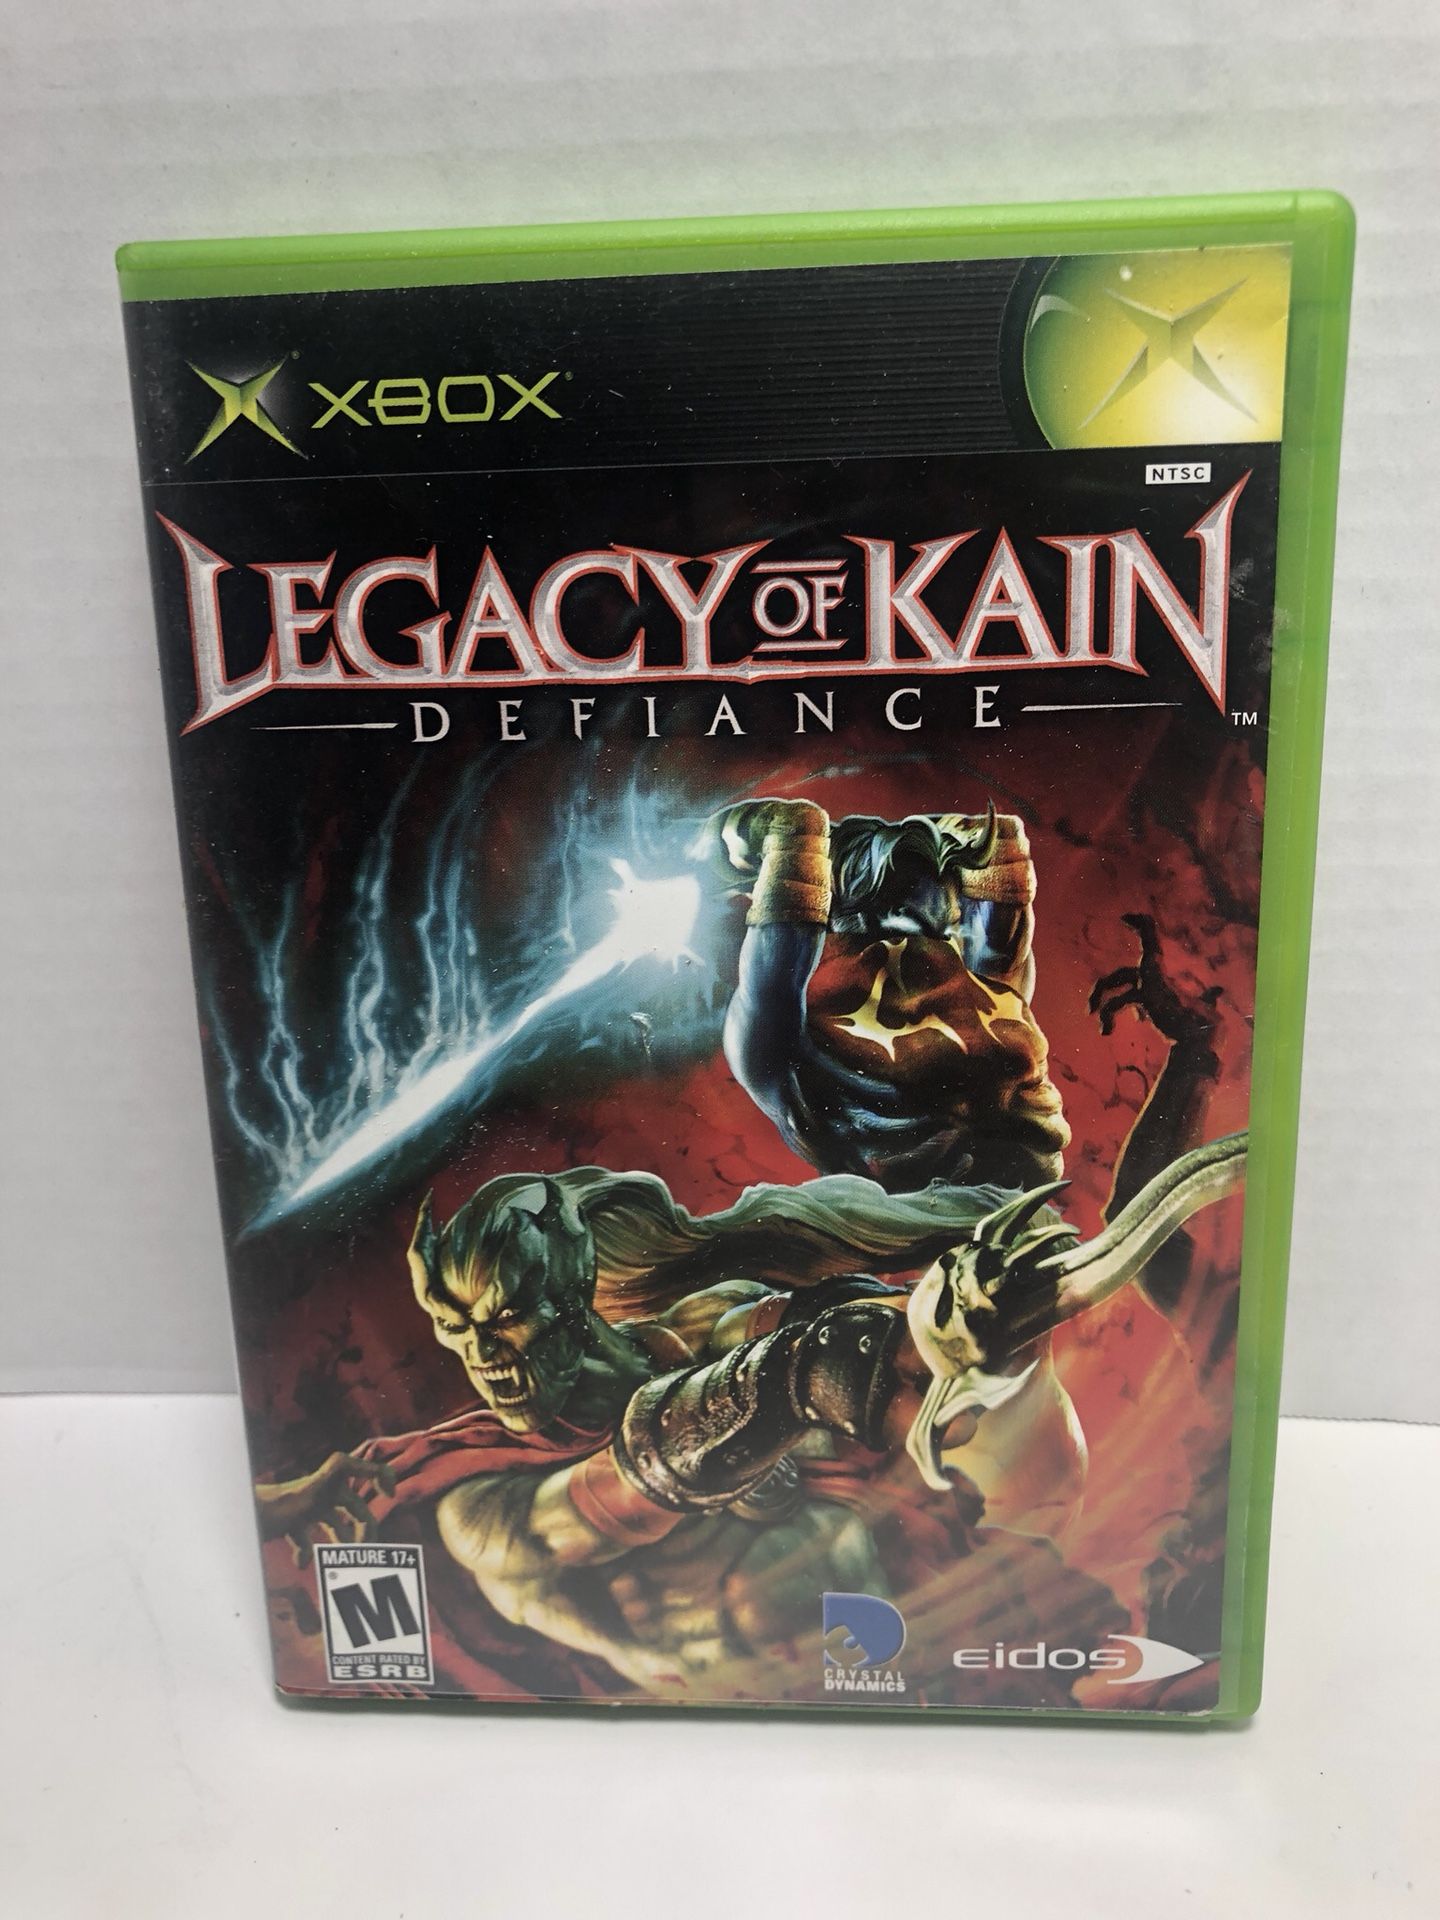 XBOX Legacy Of Kain Defiance game complete with manual